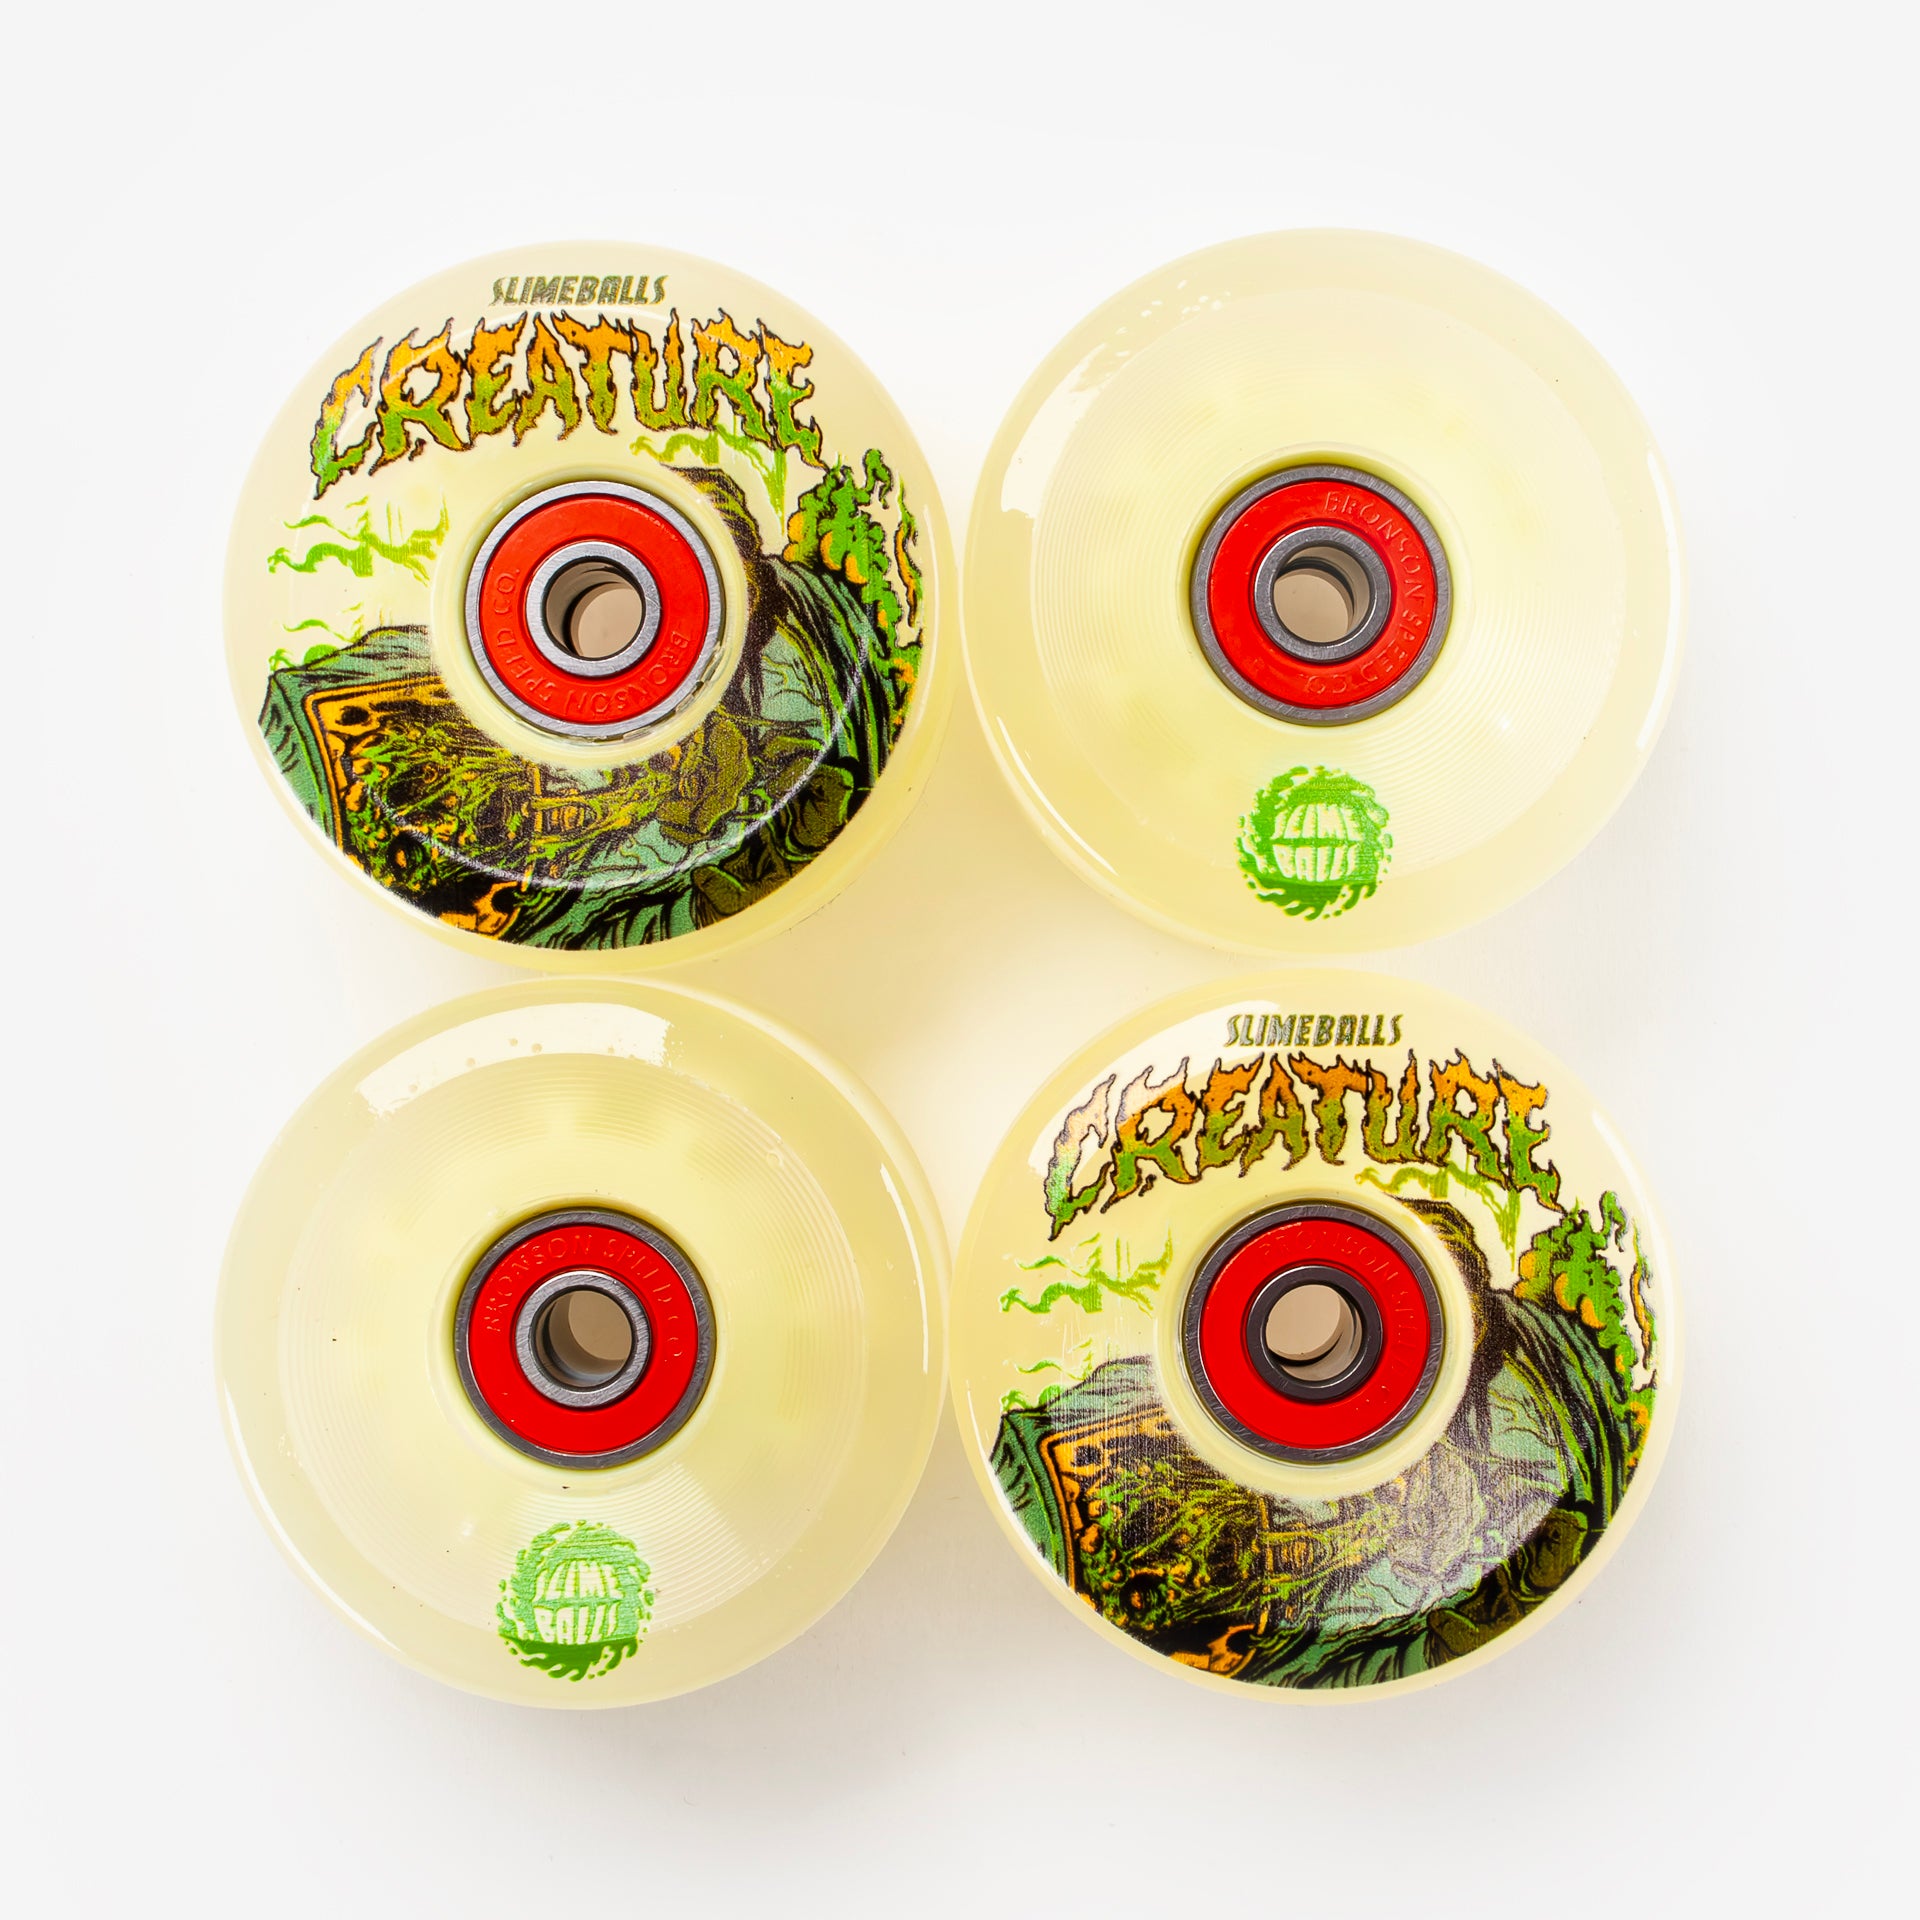 Slime Balls - 60mm - 78a Creature Atomic Light up Wheels - Green - Prime Delux Store